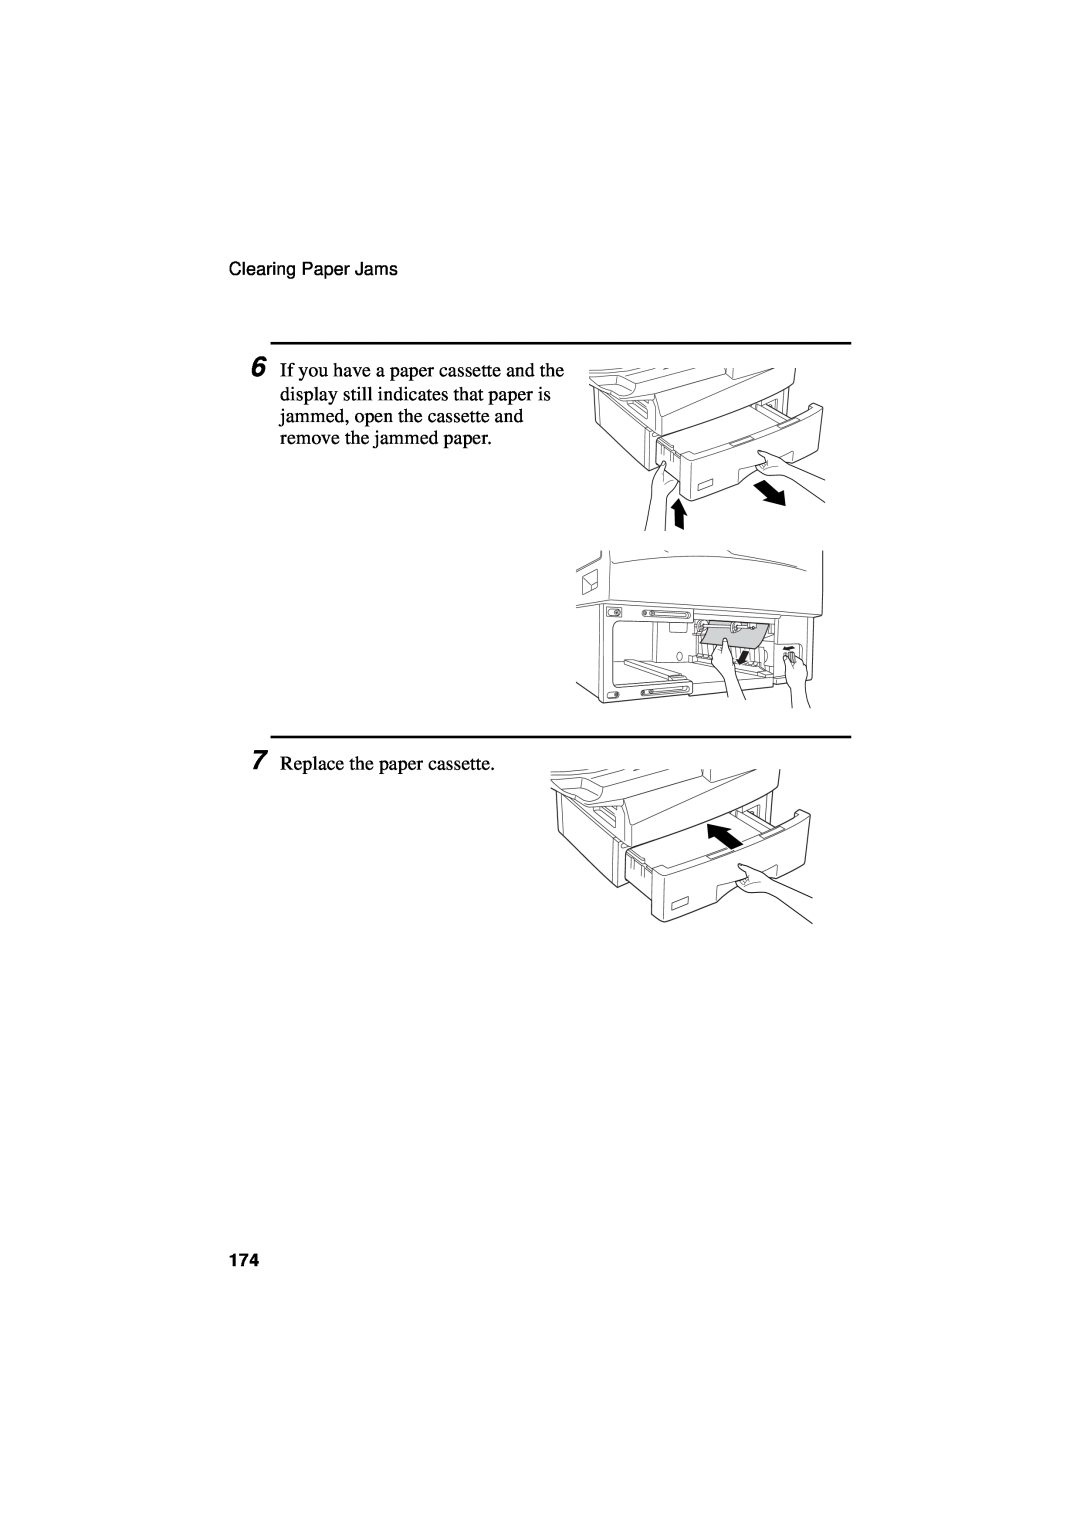 Sharp FO-5550, FO-5700, FO-4700 operation manual Replace the paper cassette, Clearing Paper Jams 